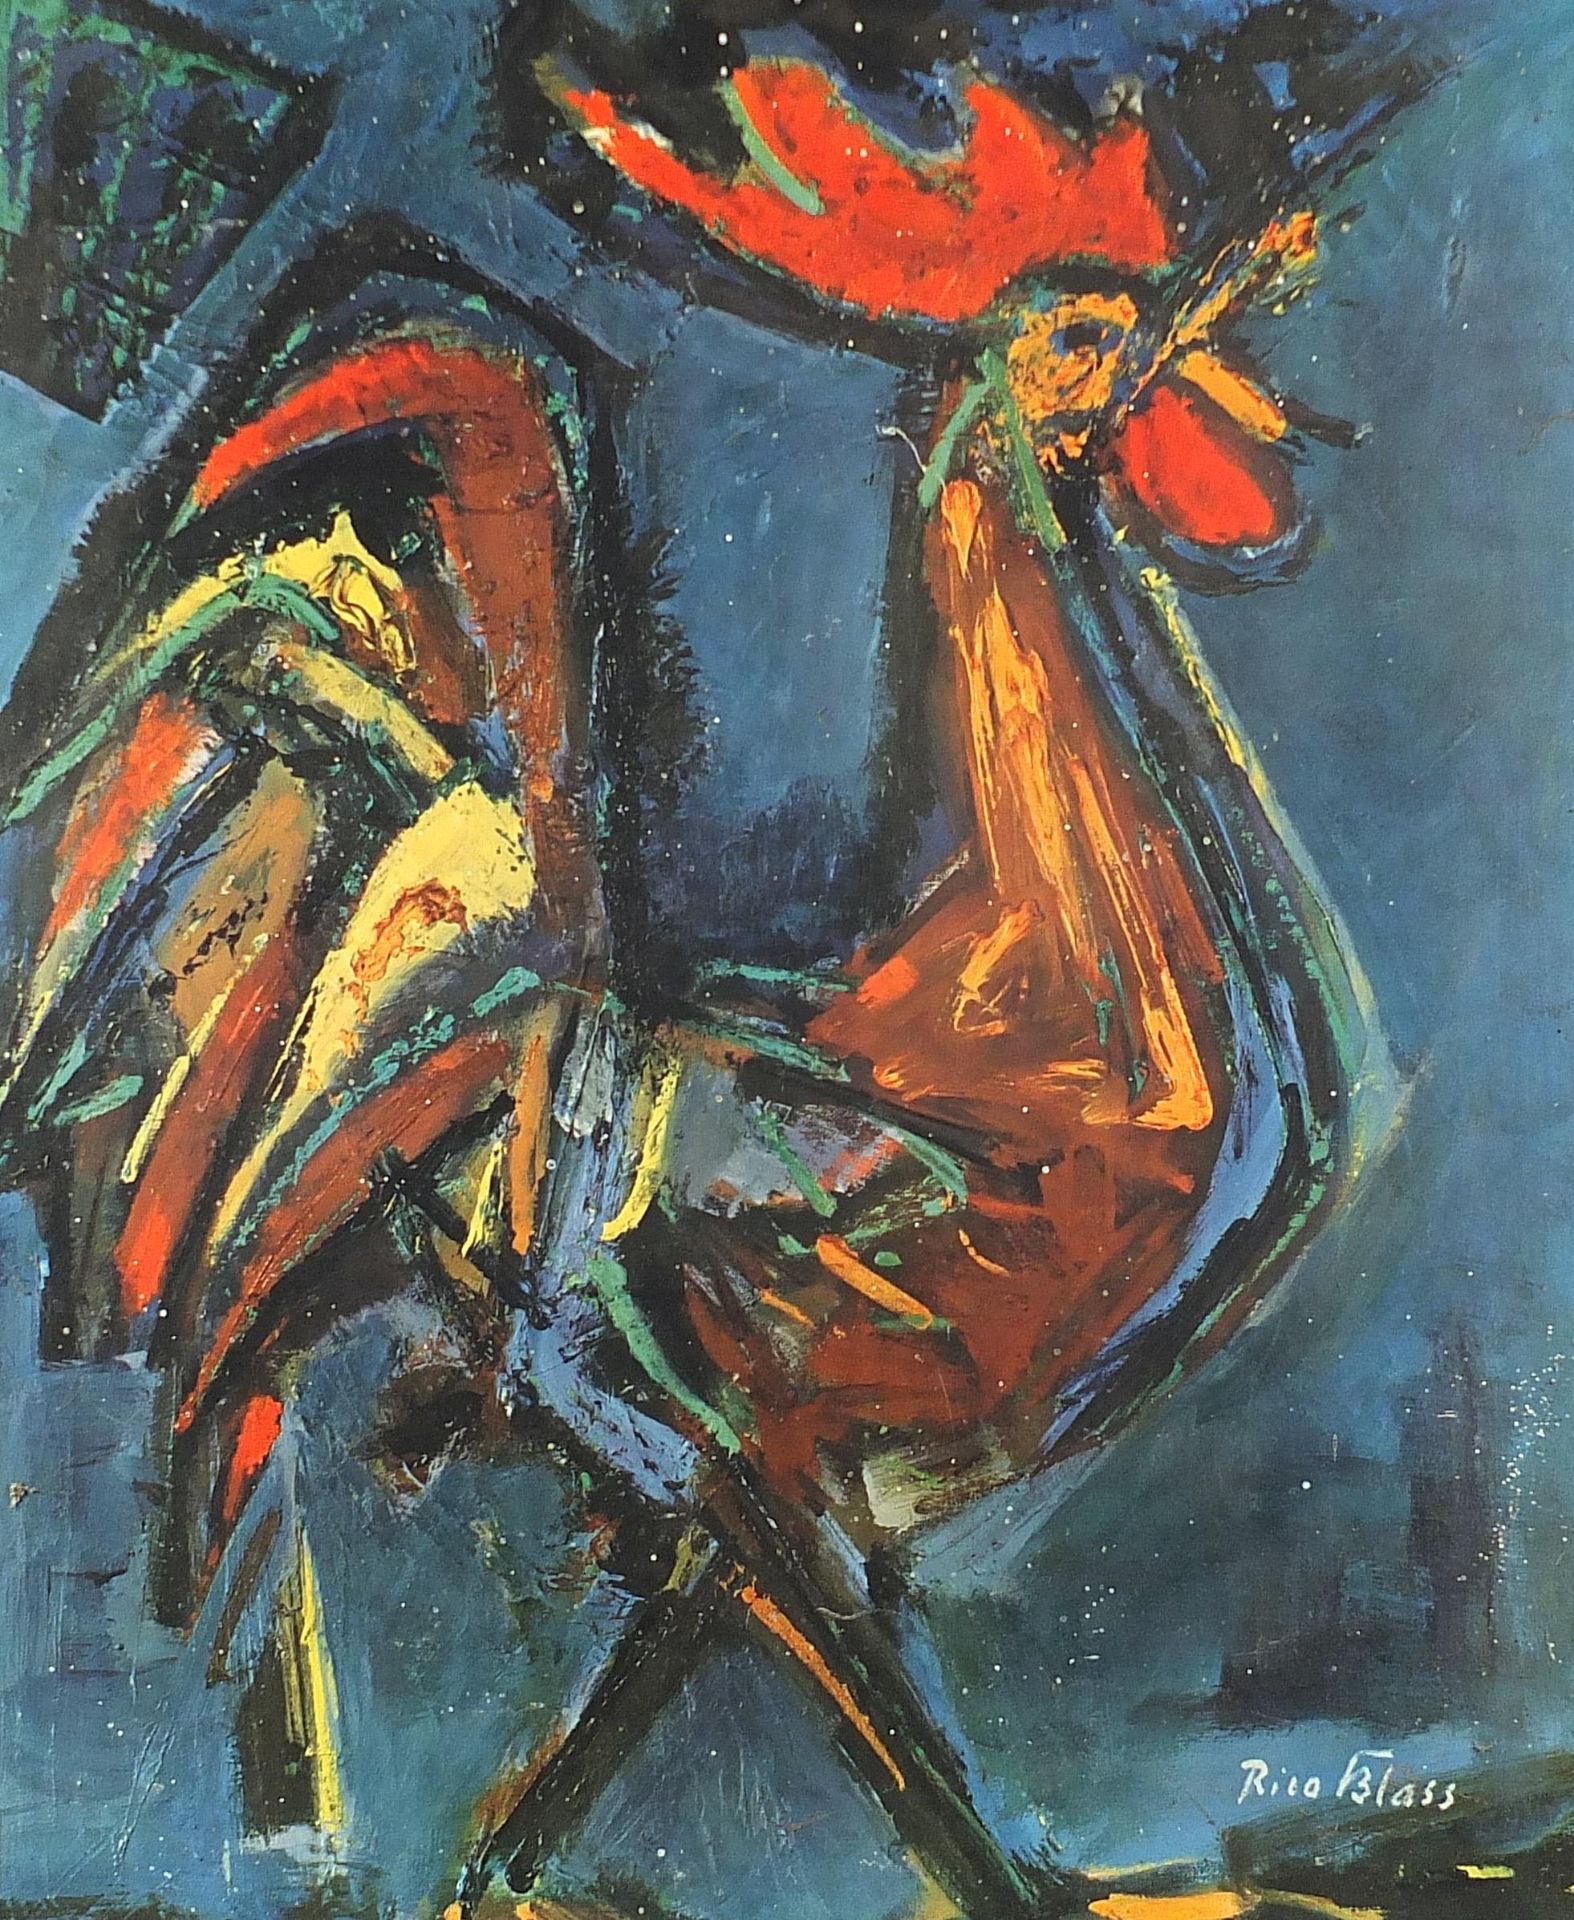 After Rico Blass - Rooster, 1970s print in colour, framed, 59cm x 49cm excluding the frame